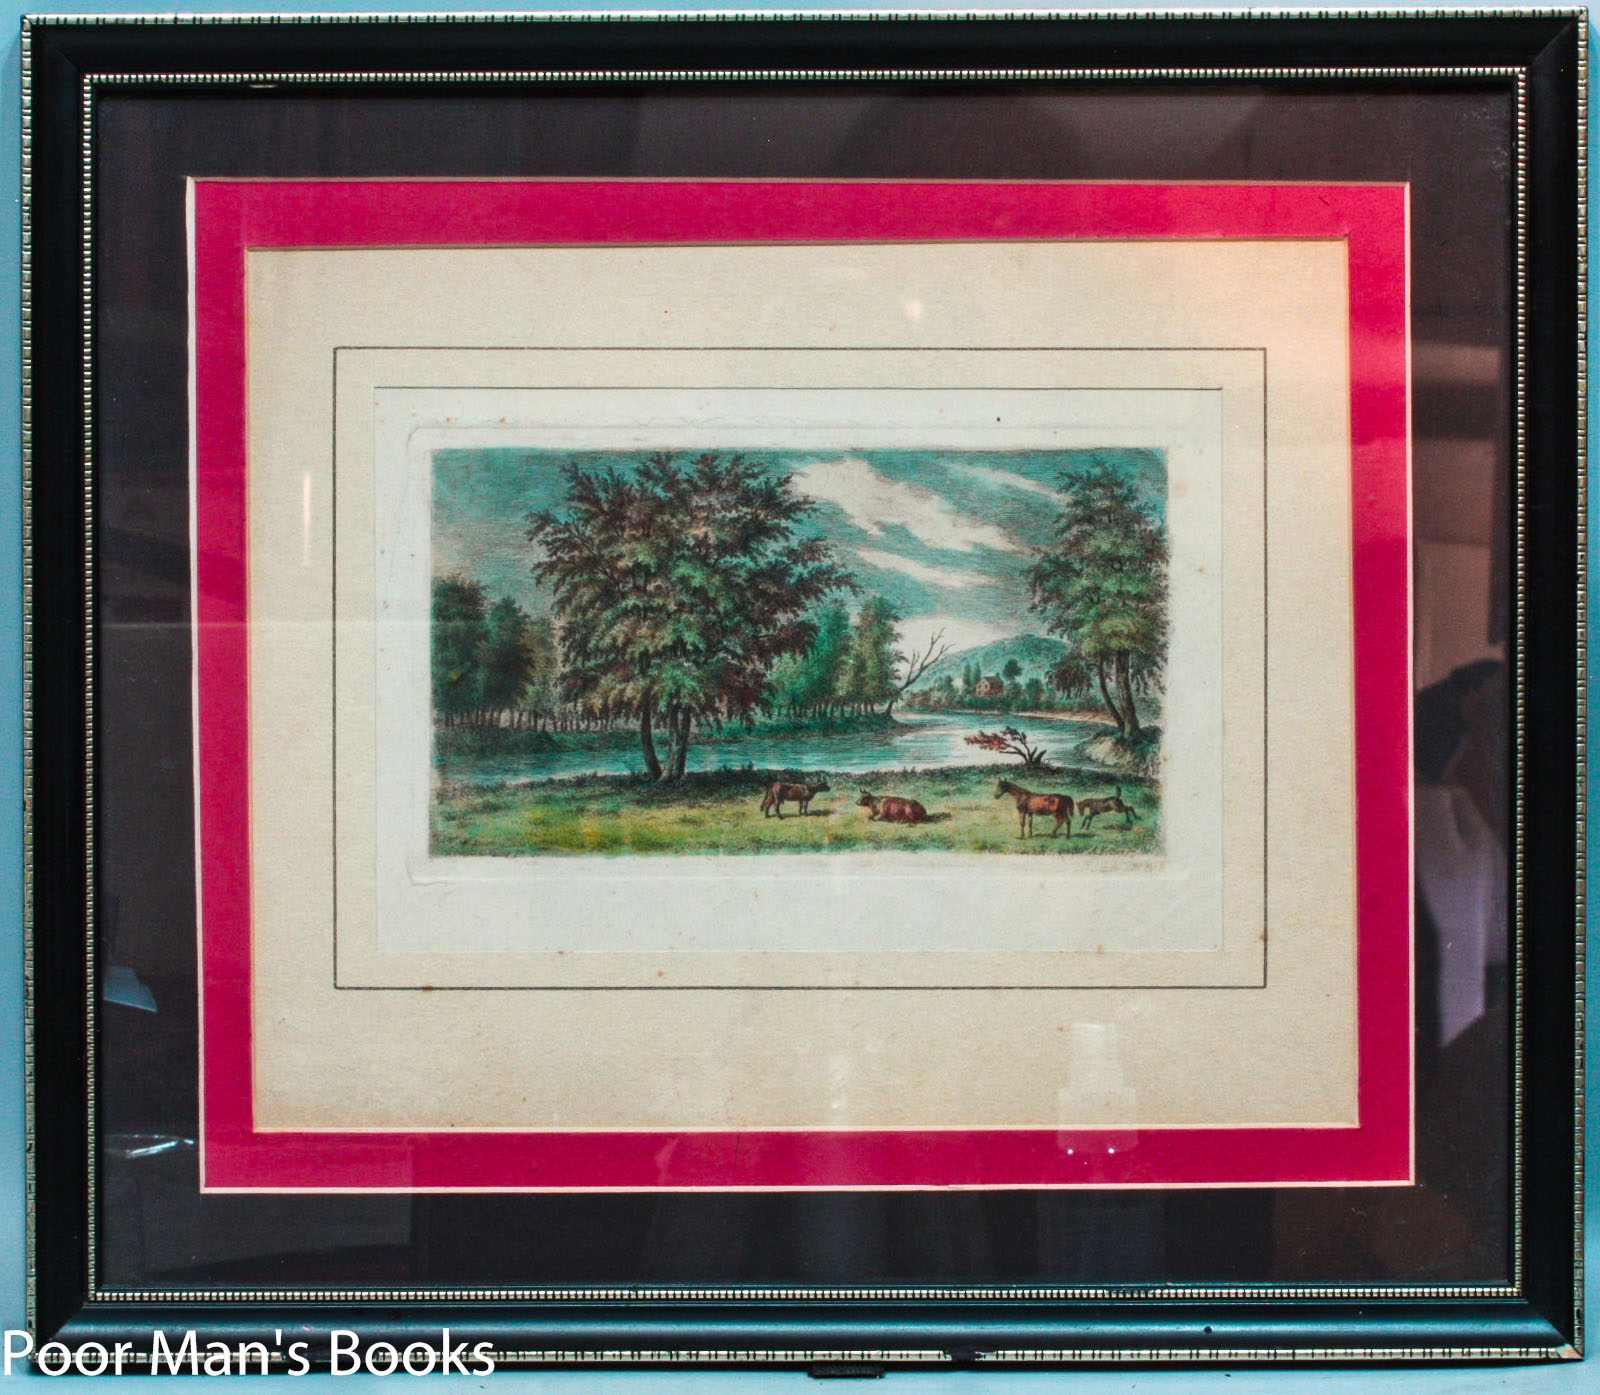 Image for FRAMED HAND-COLORED ENGRAVING OF THE SCHUYLKILL VALLEY BY AUGUSTUS KOLLNER,